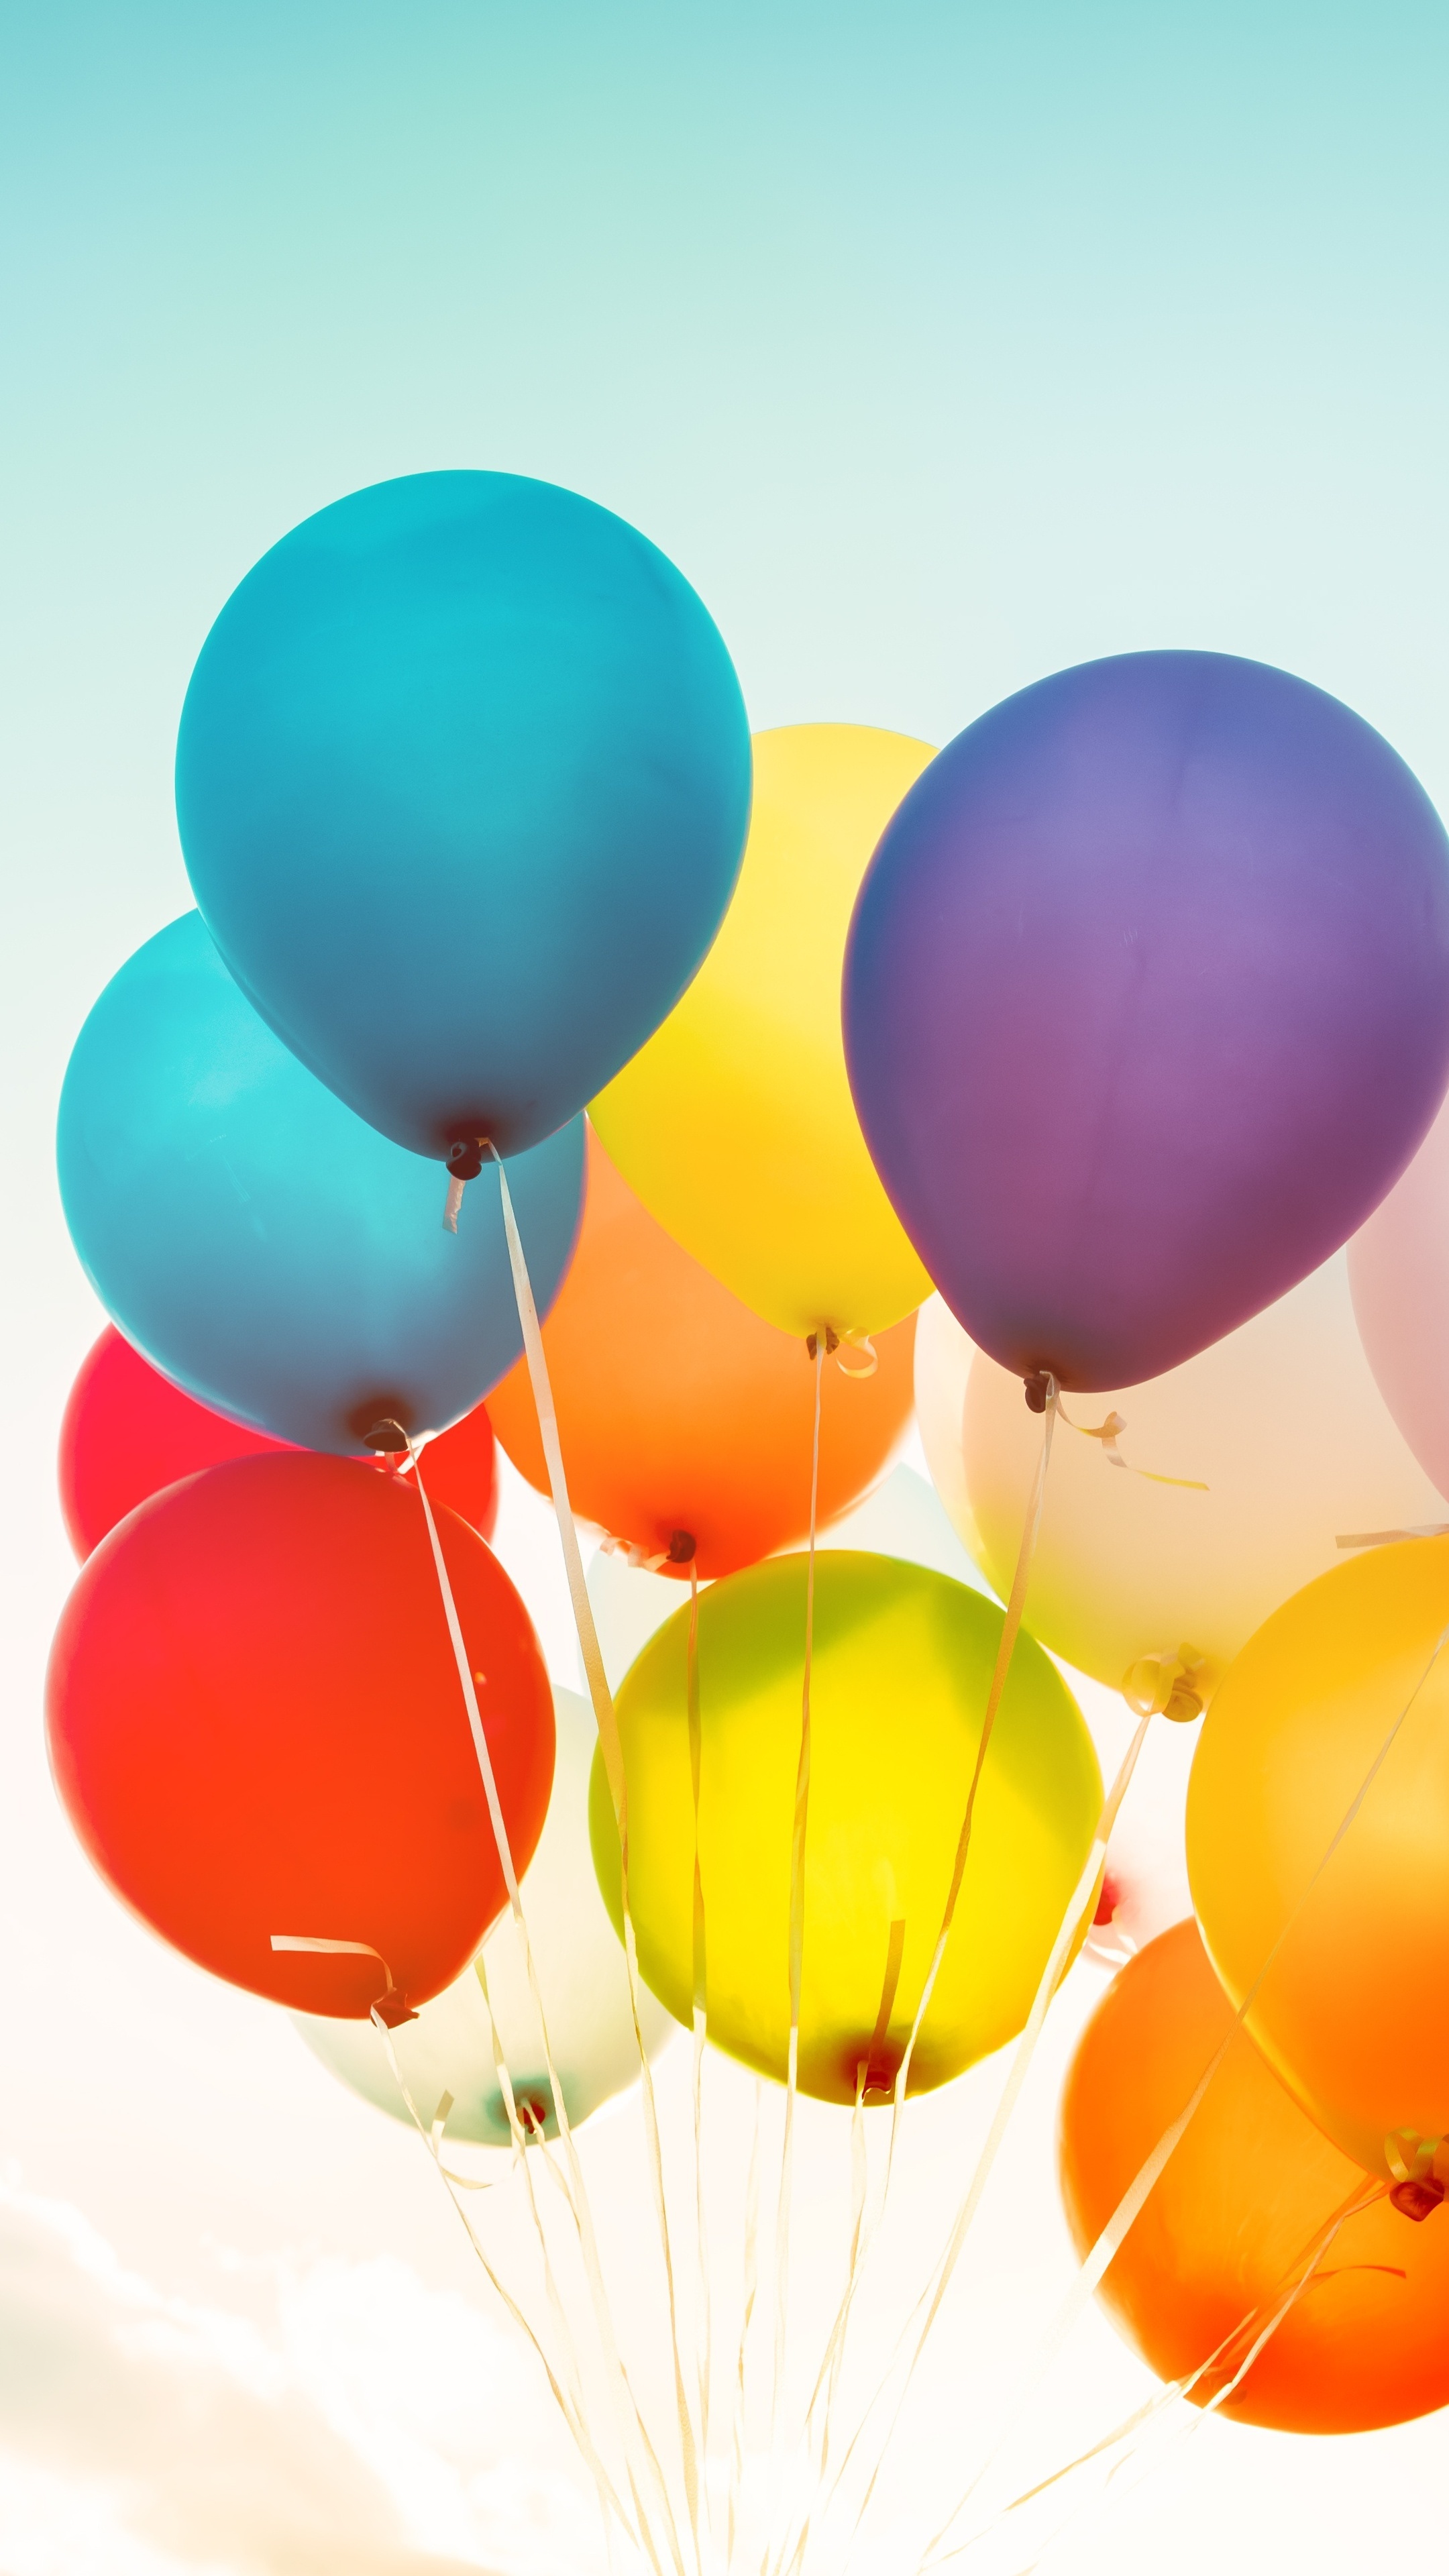 Cluster Ballooning: A cluster of helium-inflated rubber balloons. 2160x3840 4K Wallpaper.